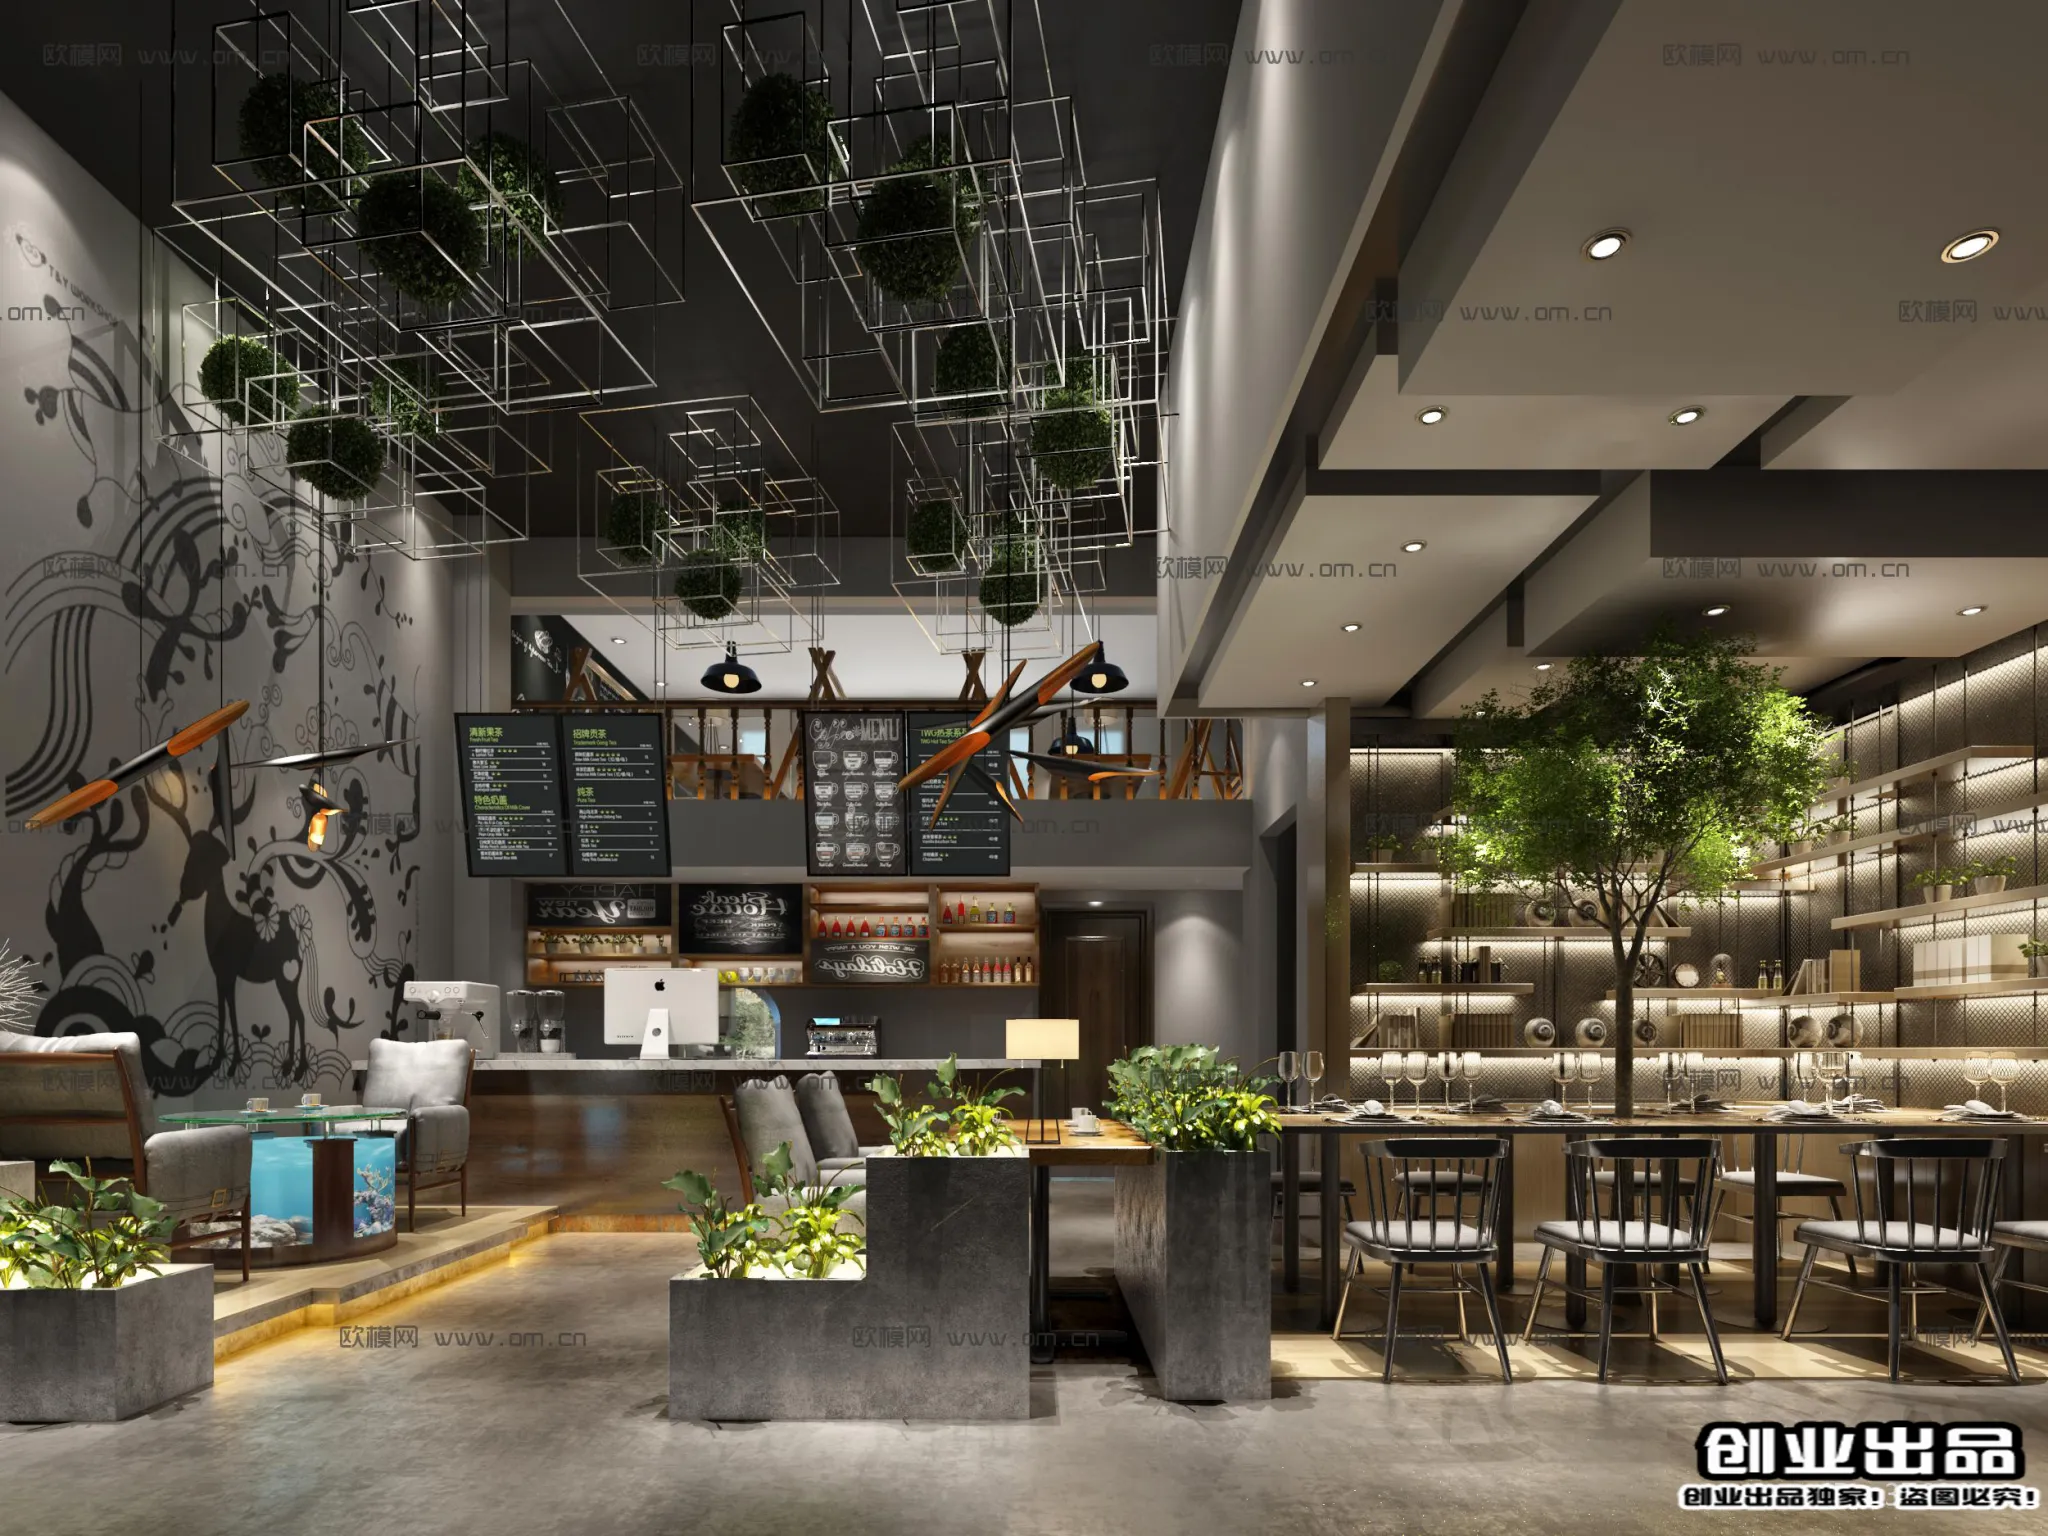 FASTFOOD STORE – 3D SCENES – 0050